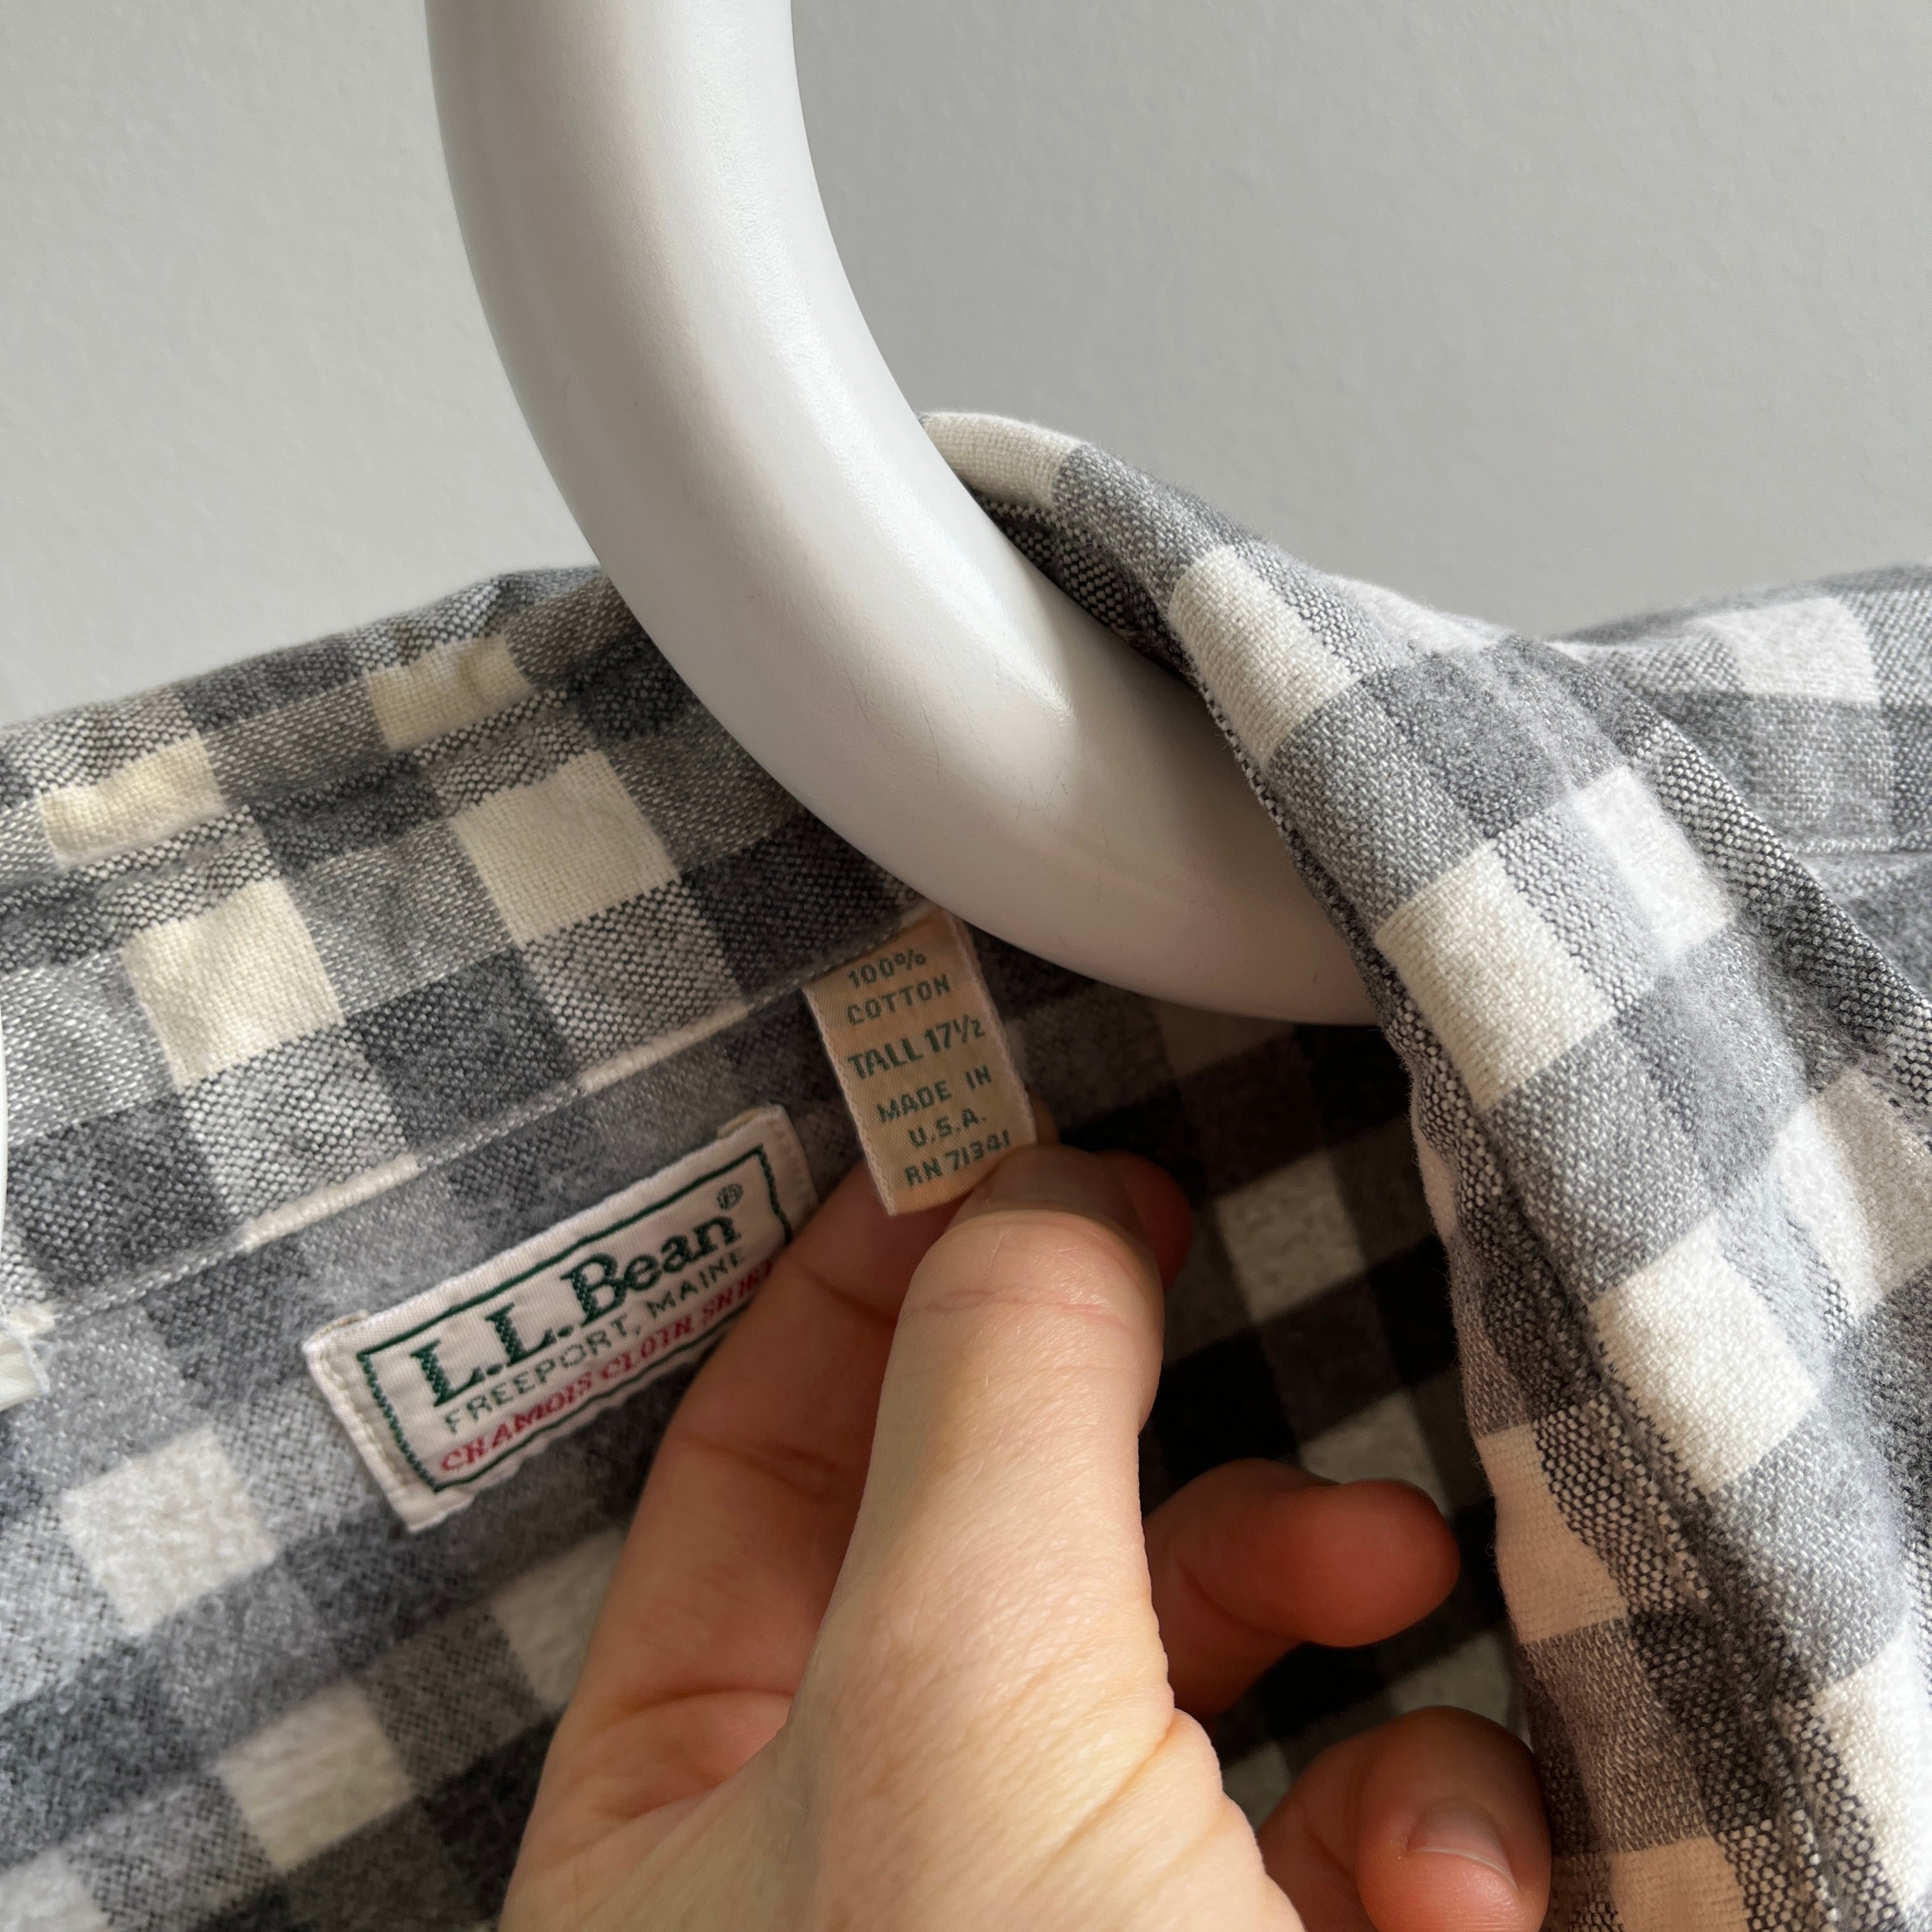 1990s USA Made L.L. Bean Gray and White Checkered Plaid Flannel